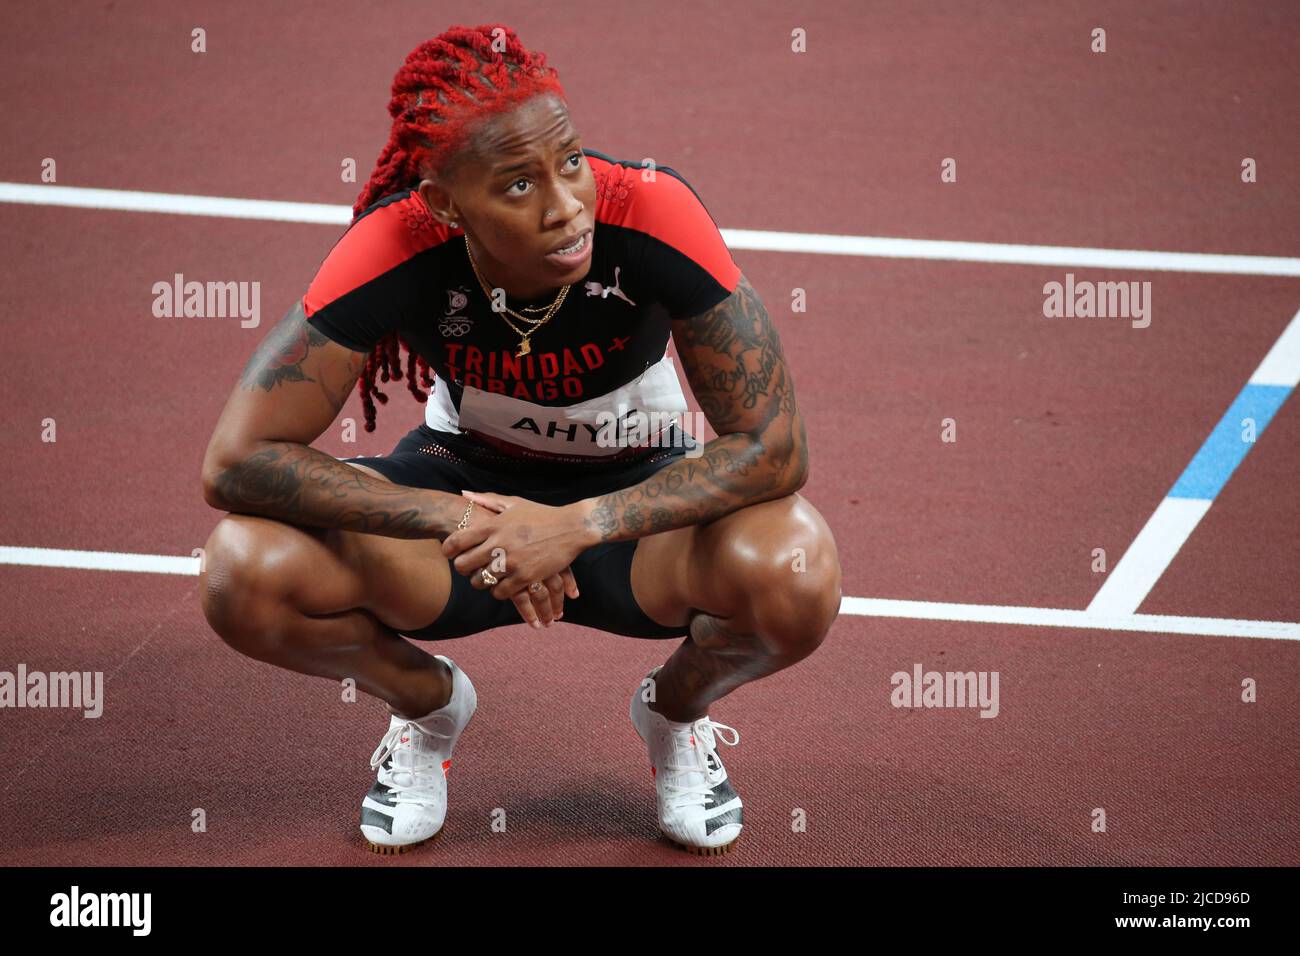 JULY 31st, 2021 - TOKYO, JAPAN: Michelle-Lee Ahye of Trinidad and Tobago is third in 11.00 in the Women's 100m Semi-Final 2 at the Tokyo 2020 Olympic Stock Photo